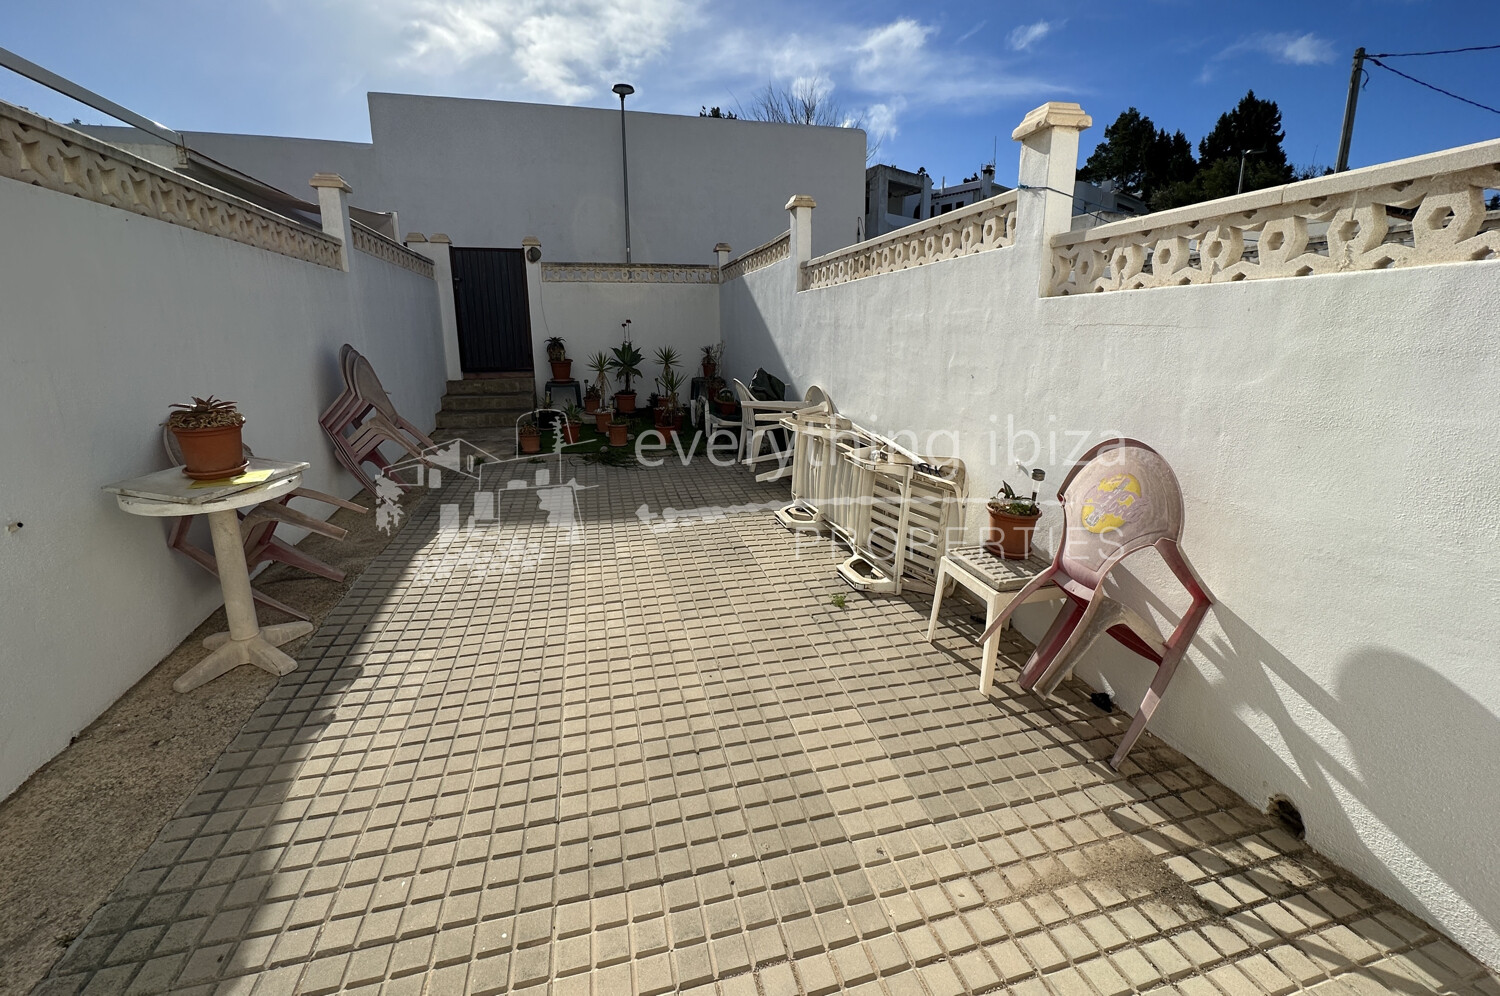 Cosy One Bedroomed Apartment Minutes from the Beach, ref. 1531, for sale in Ibiza by everything ibiza Properties